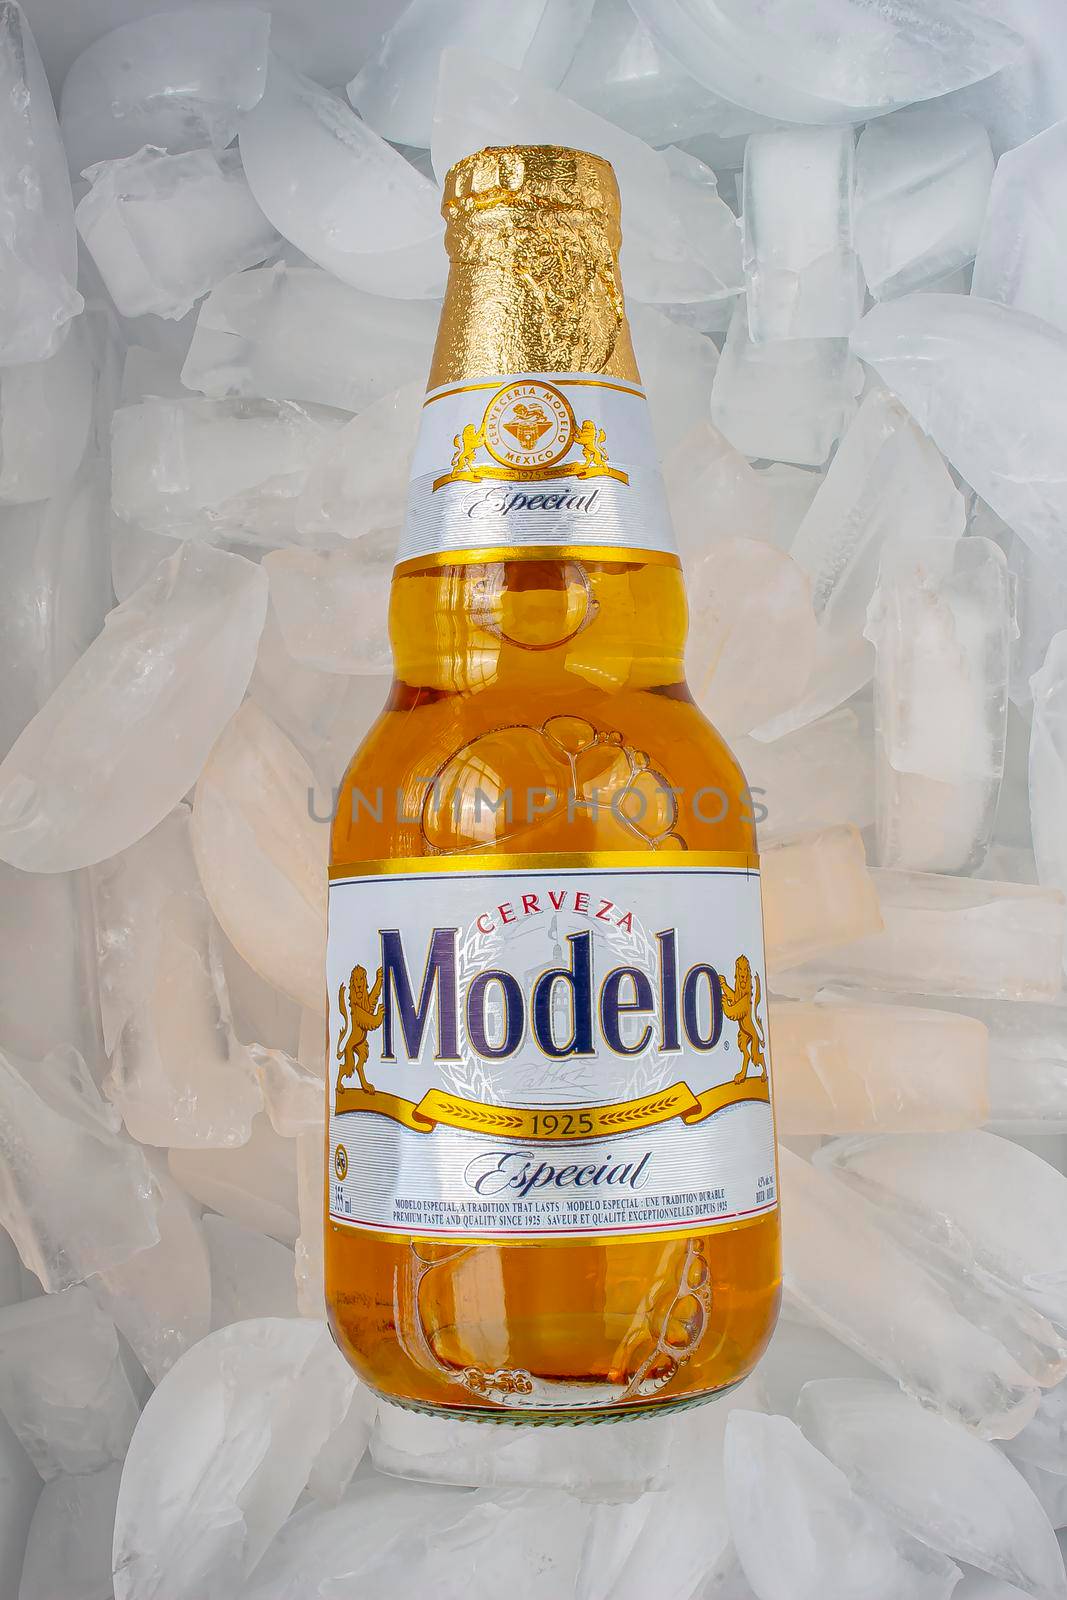 Modelo Especial beer bottle clear bright yellow colour on ice by oasisamuel